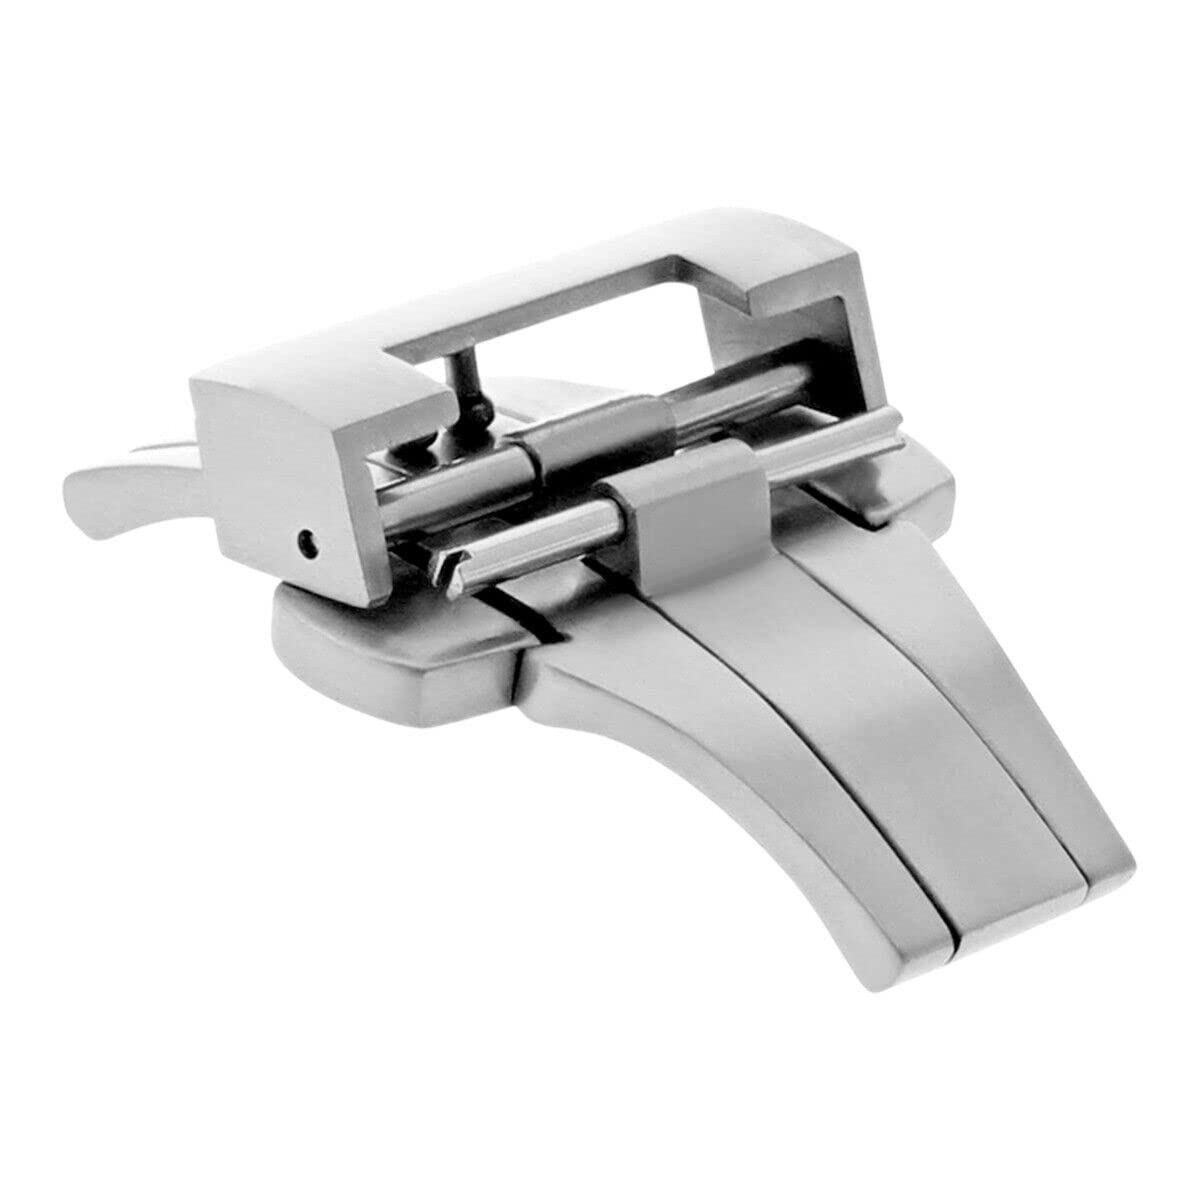 22mm Deployment Clasp Buckle Compatible with 44mm Panerai Marina 24mm Leather Strap Band Br